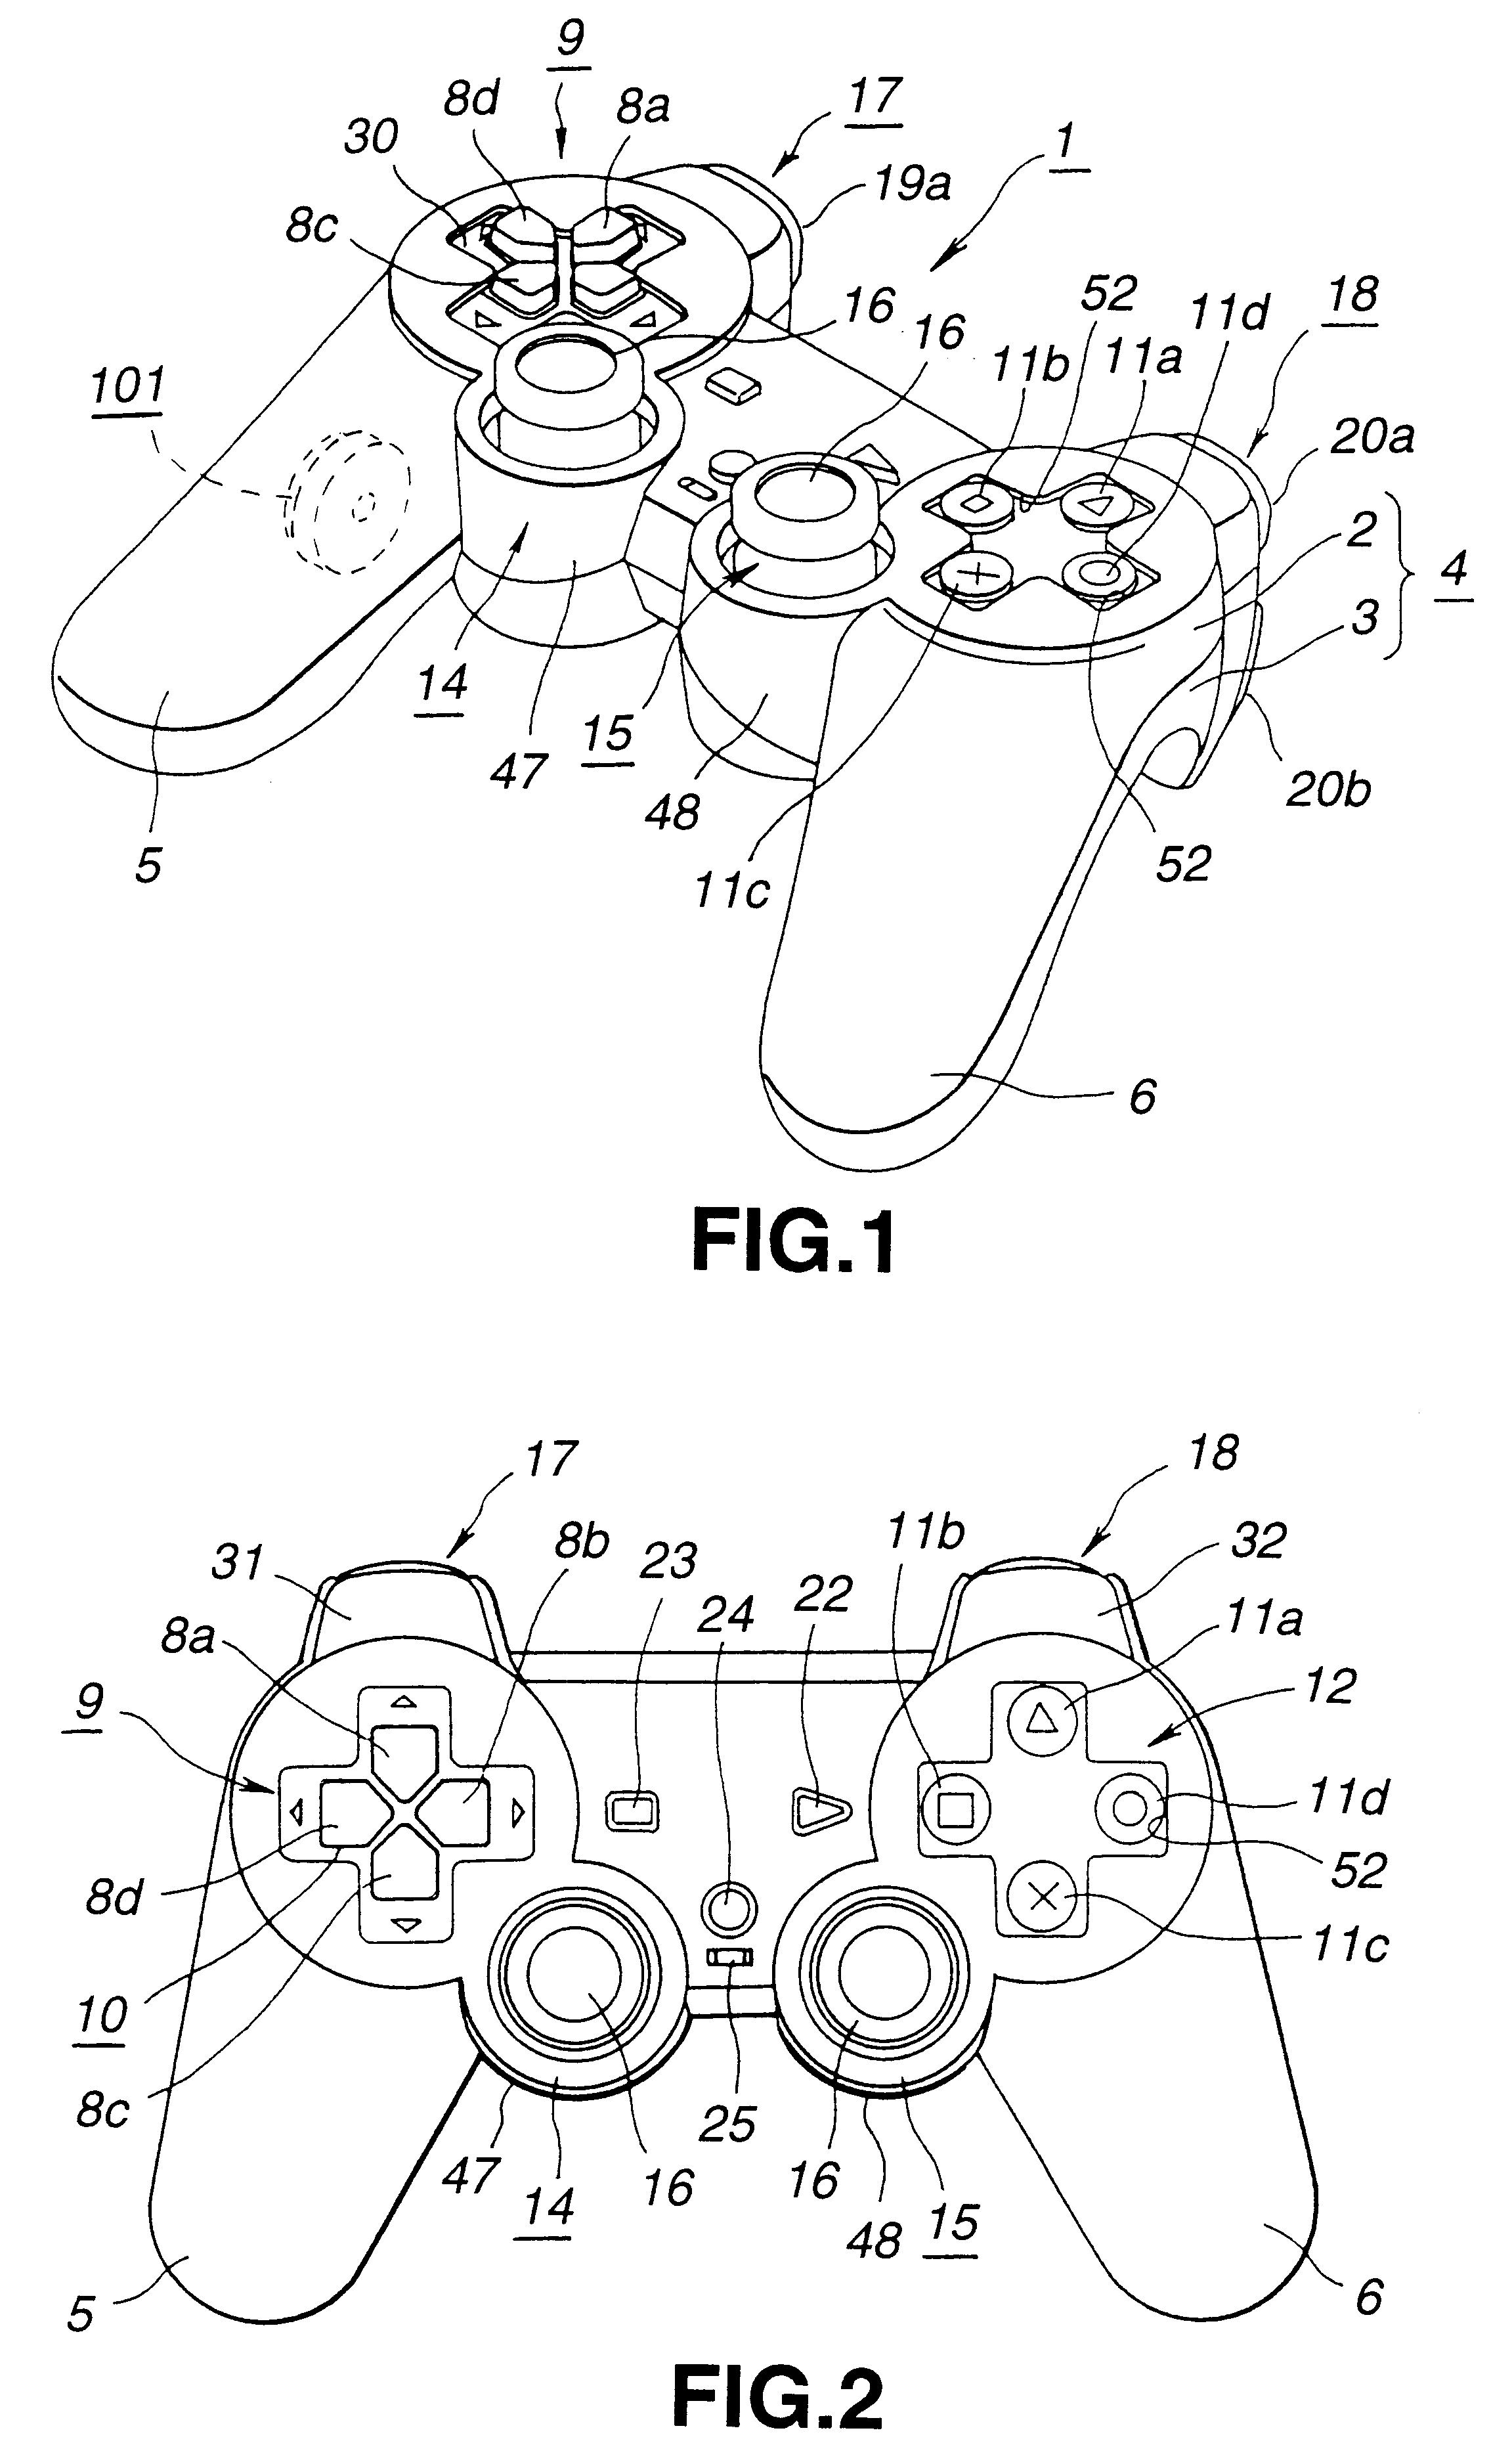 Actuating device and system exploiting the actuating device